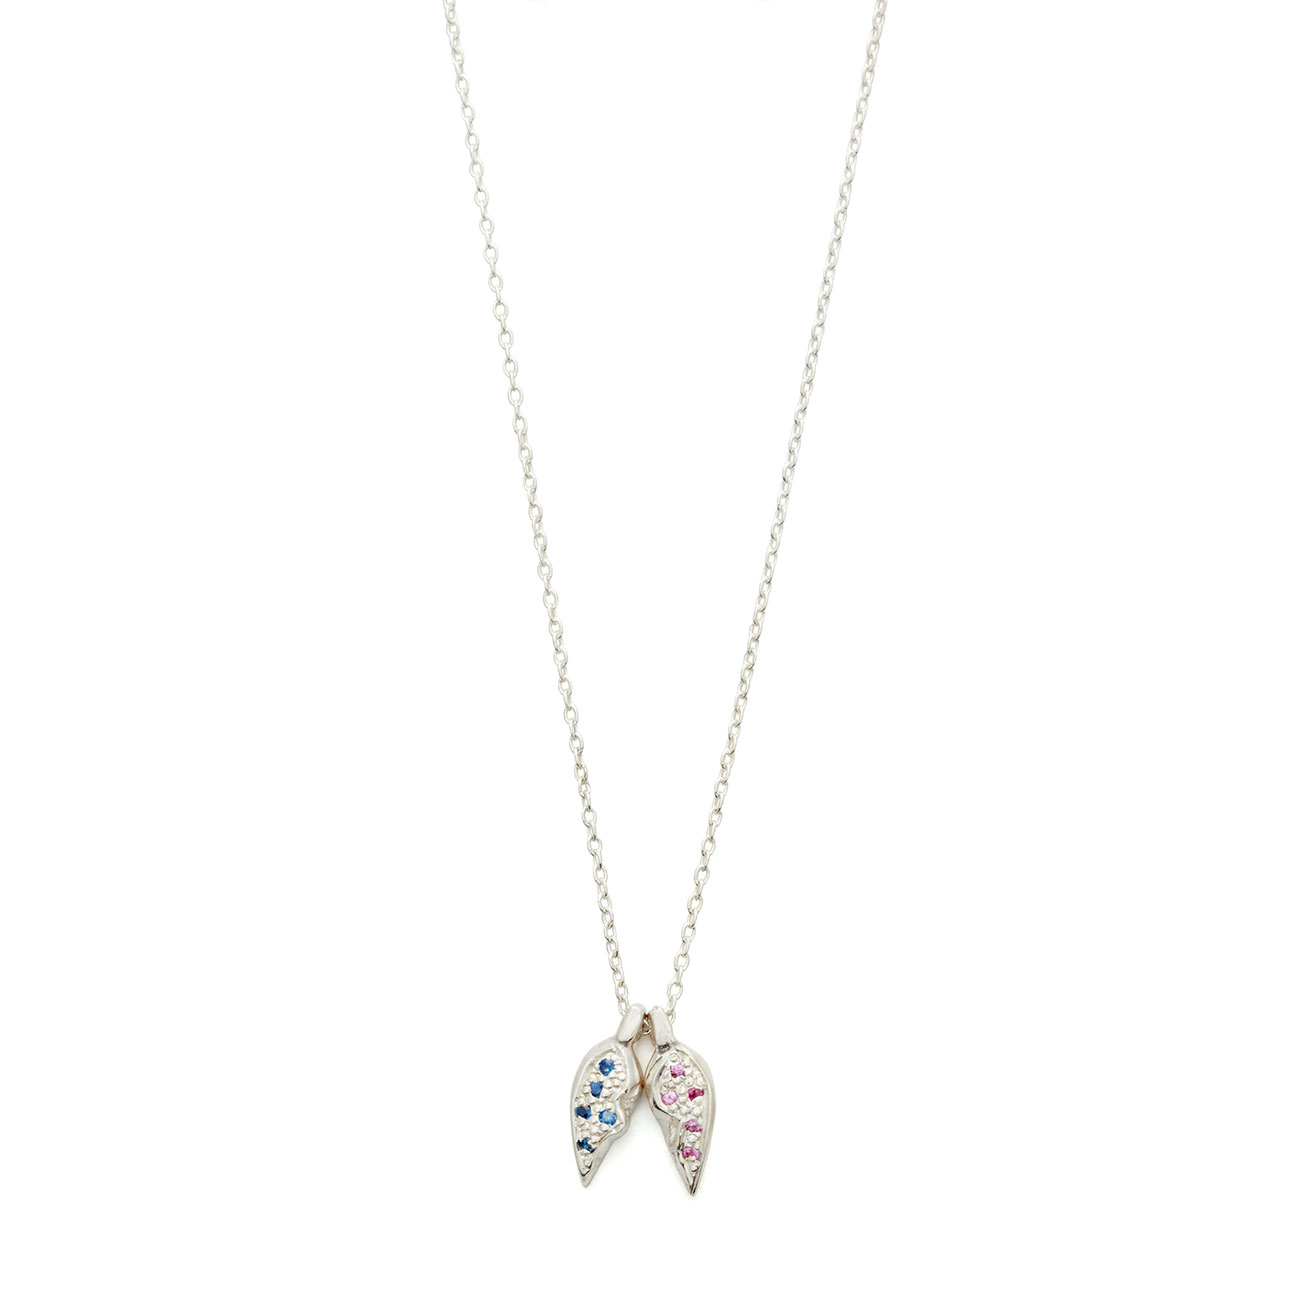 Sterling Silver Heart Halves Necklace With Blue And Pink Sapphires - Elisa Solomon